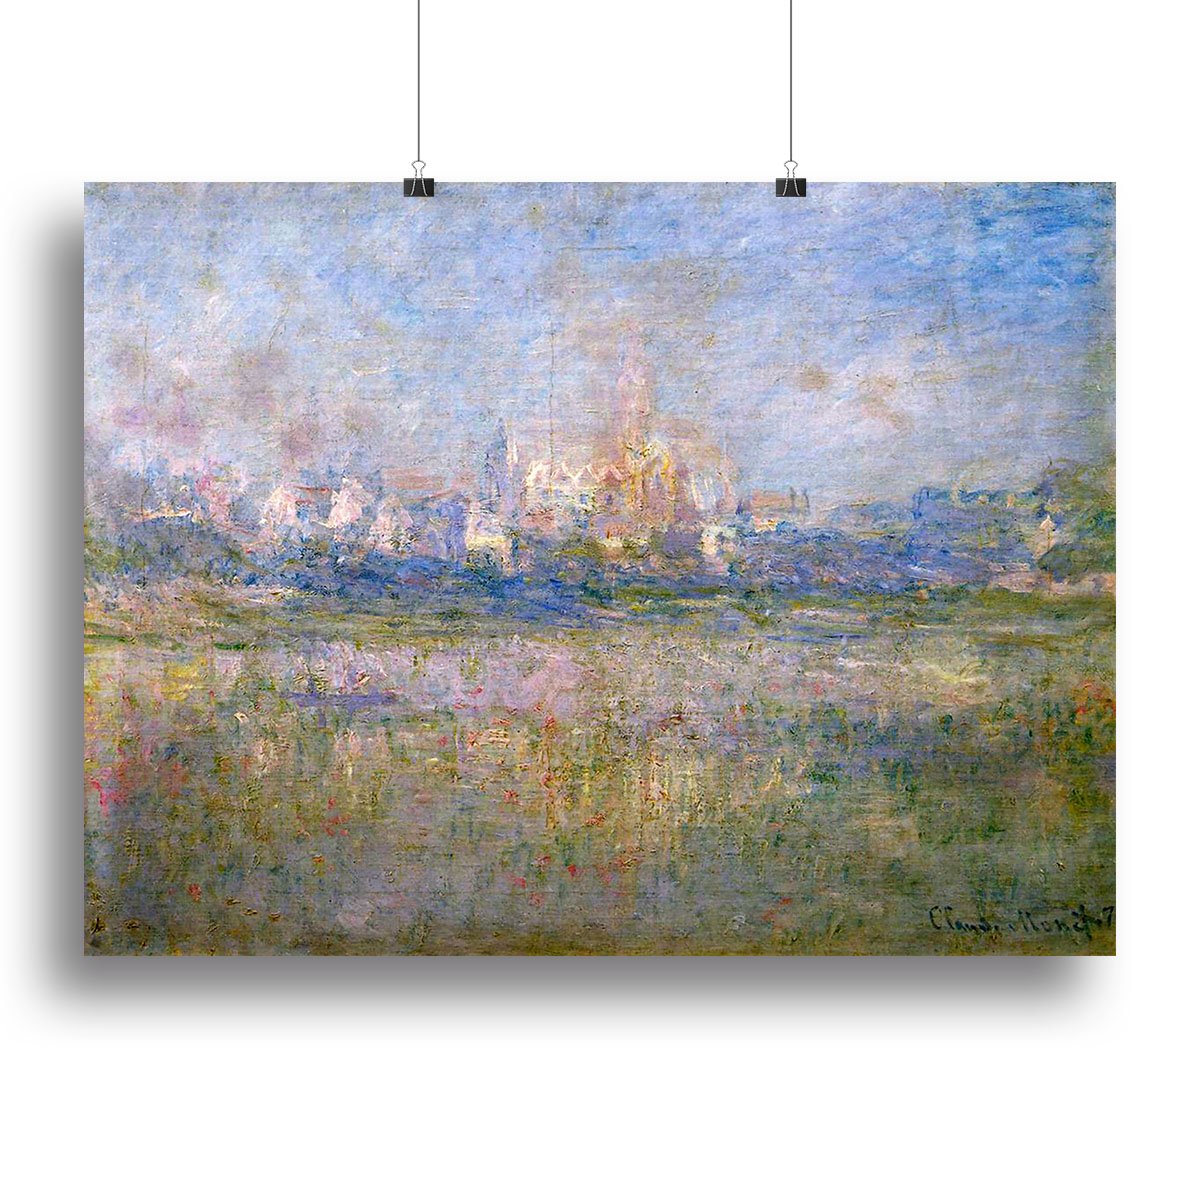 Vctheuil in the fog by Monet Canvas Print or Poster